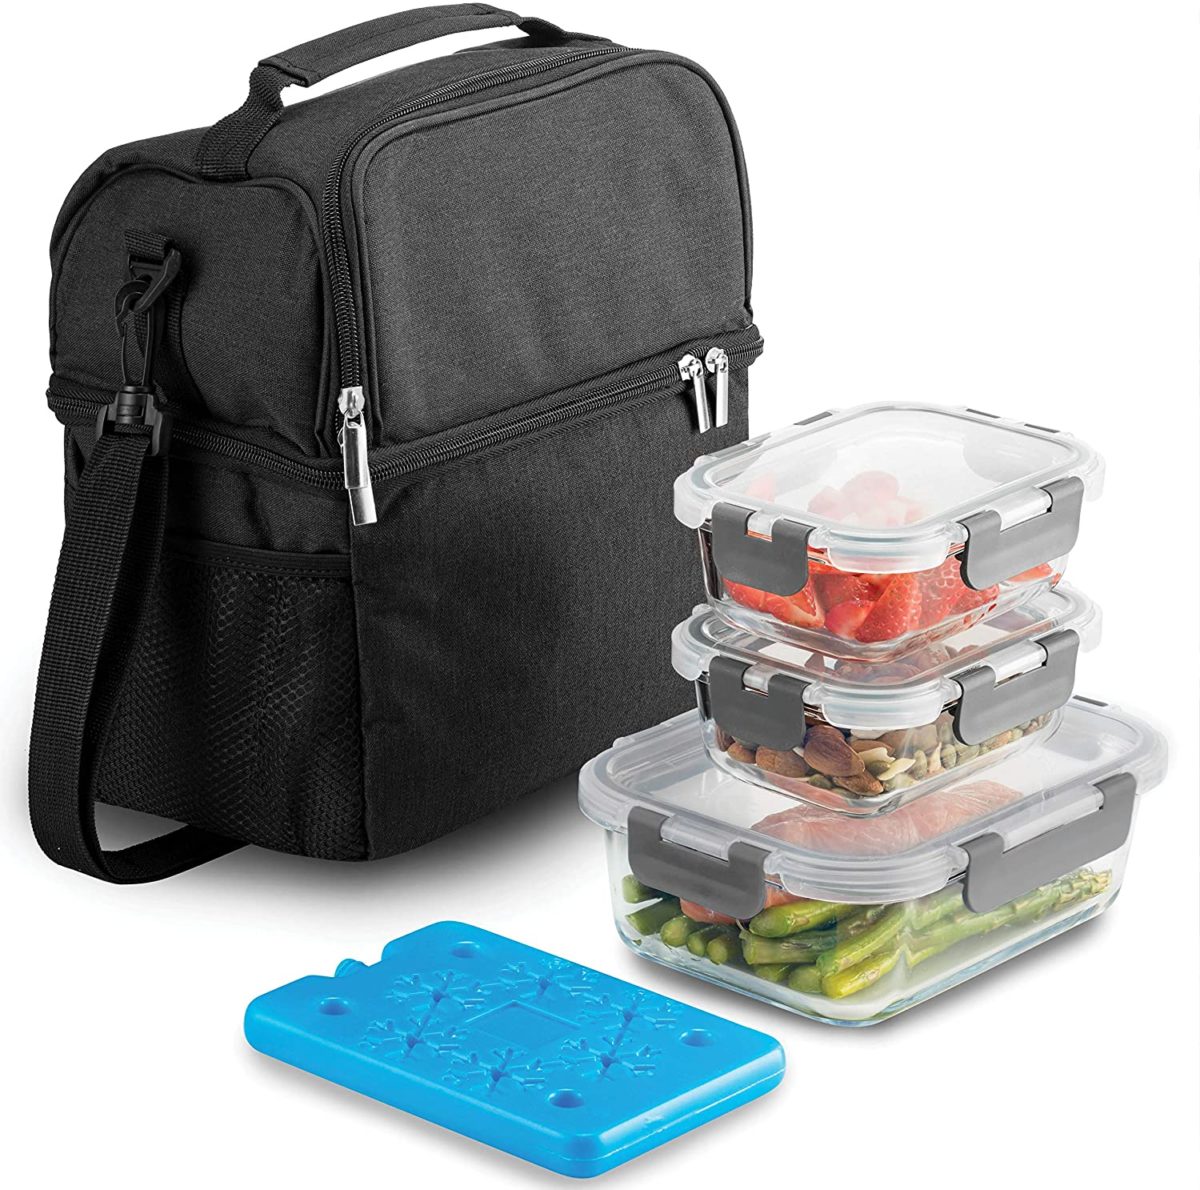 10 Best Lunch Boxes for Men